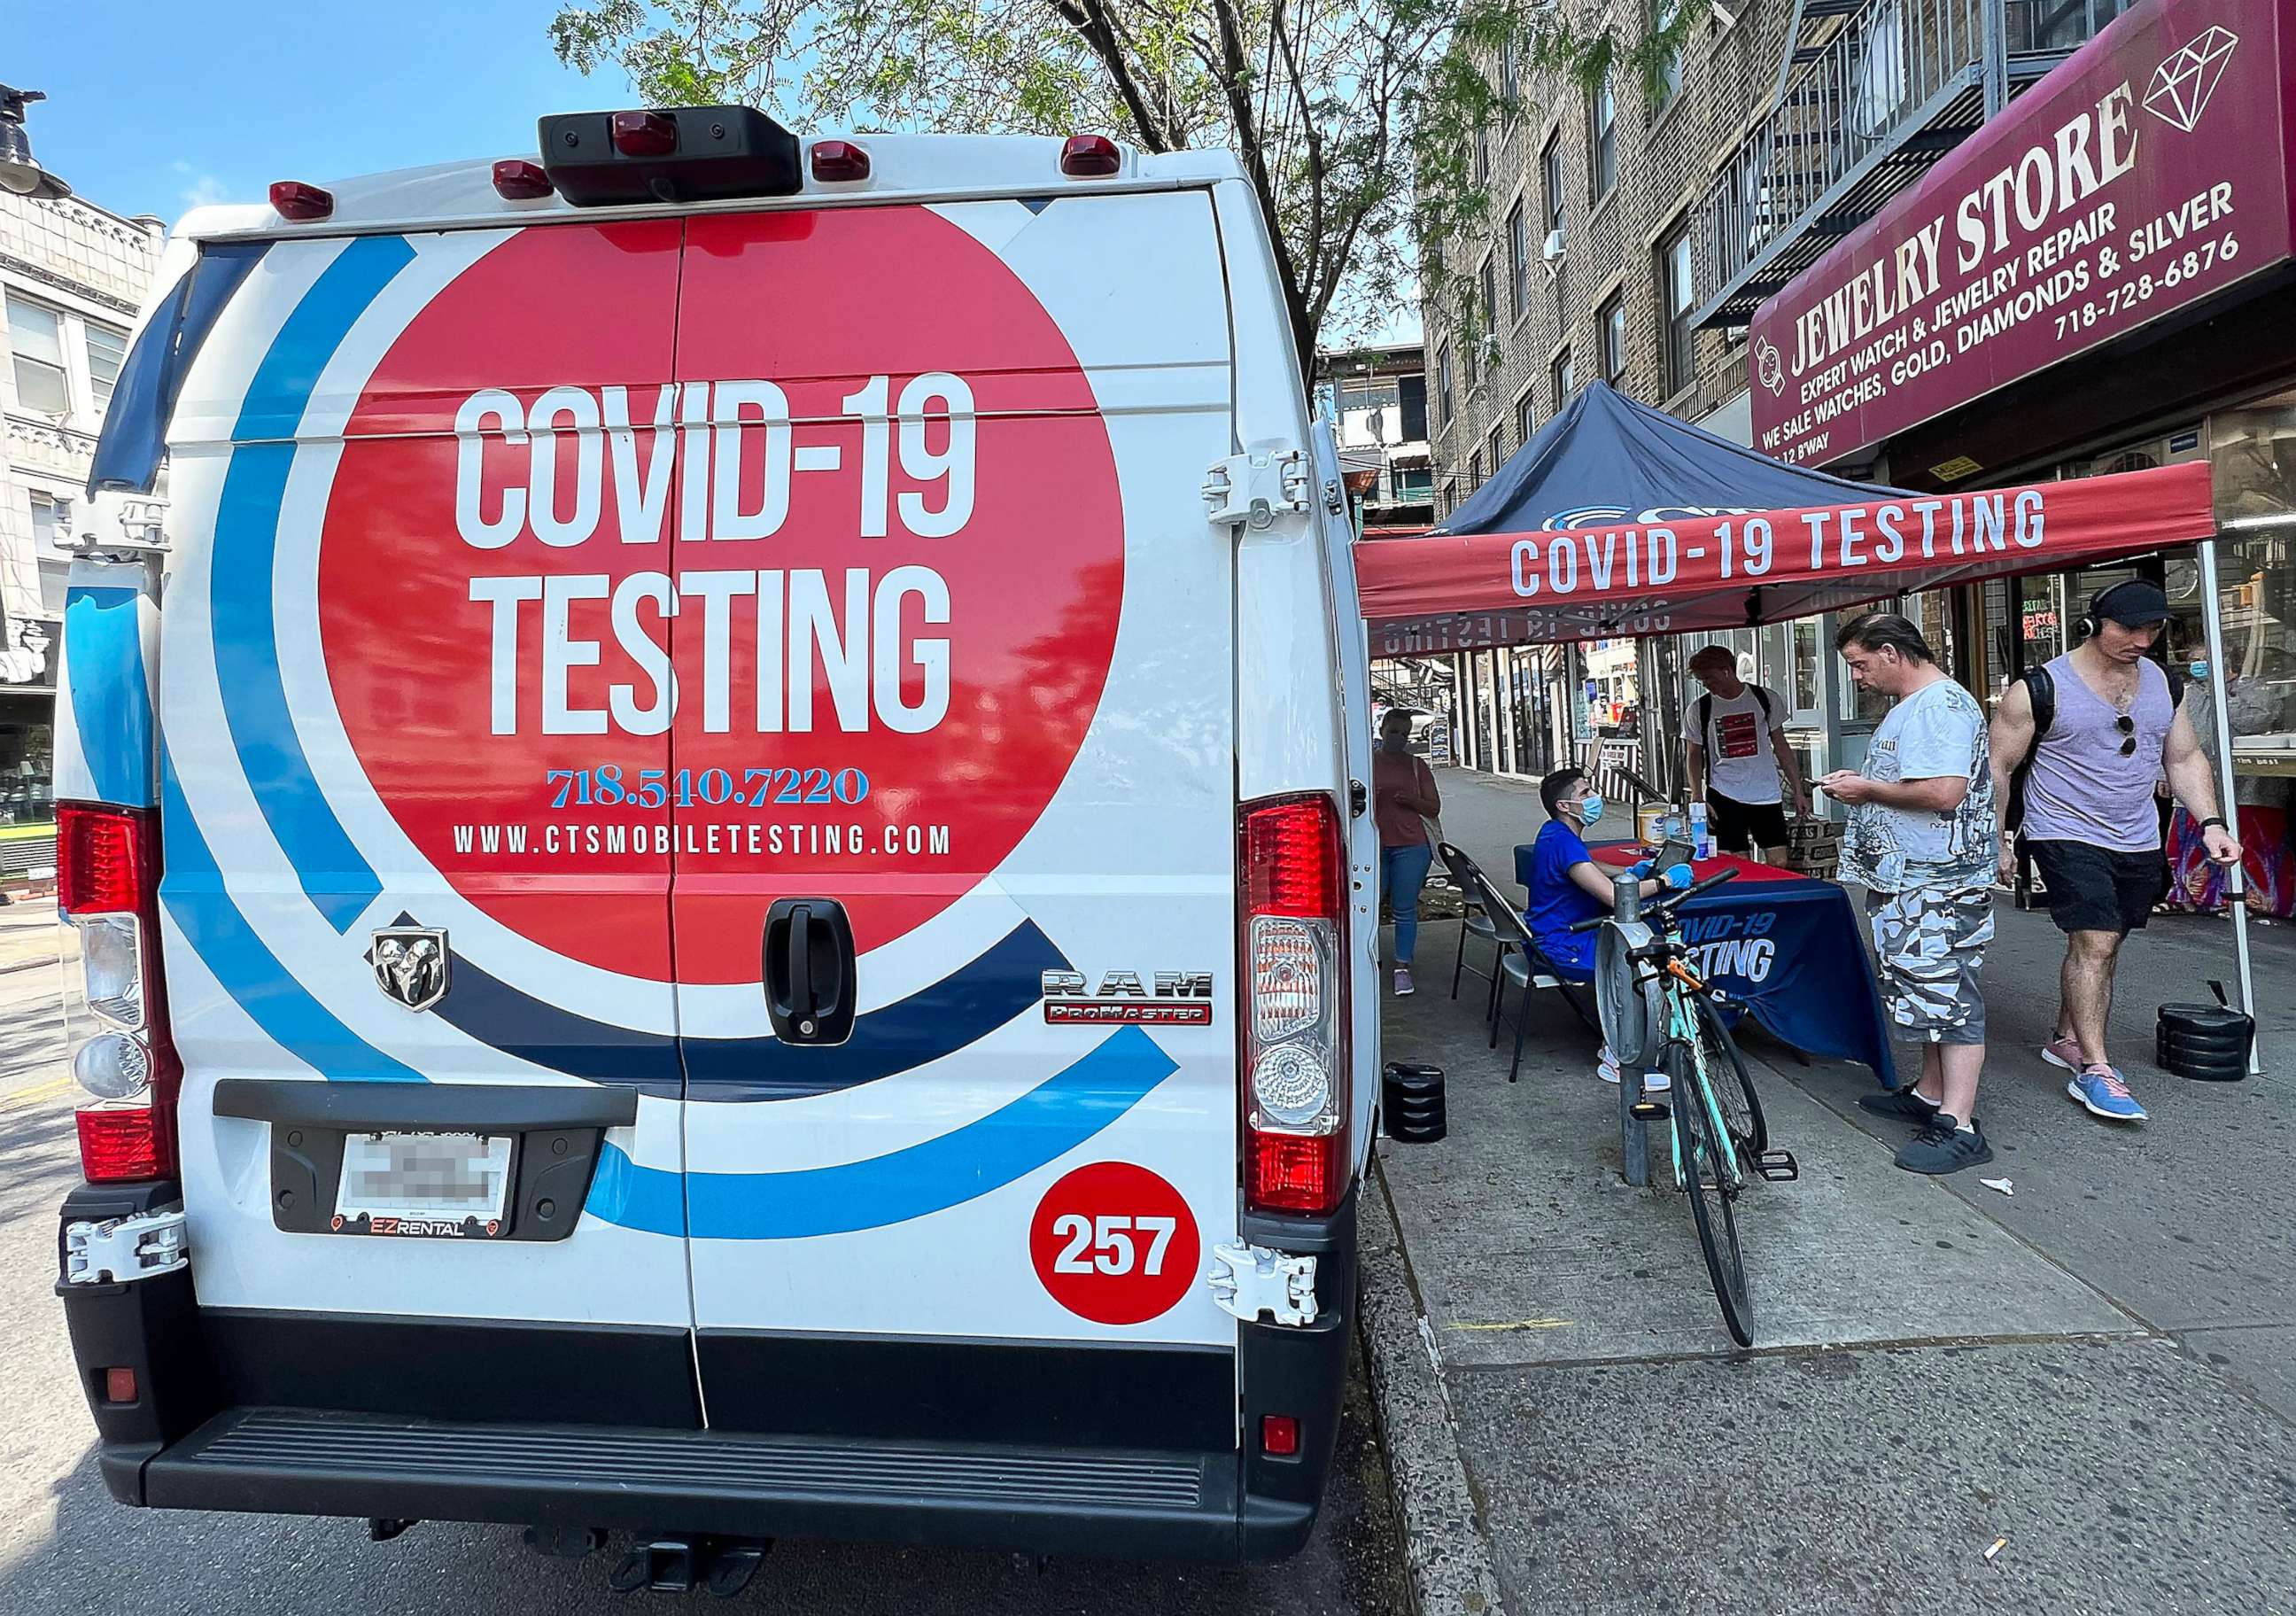 PHOTO: A mobile Covid-19 testing station is set up on a sidewalk in New York, on May 31, 2022.